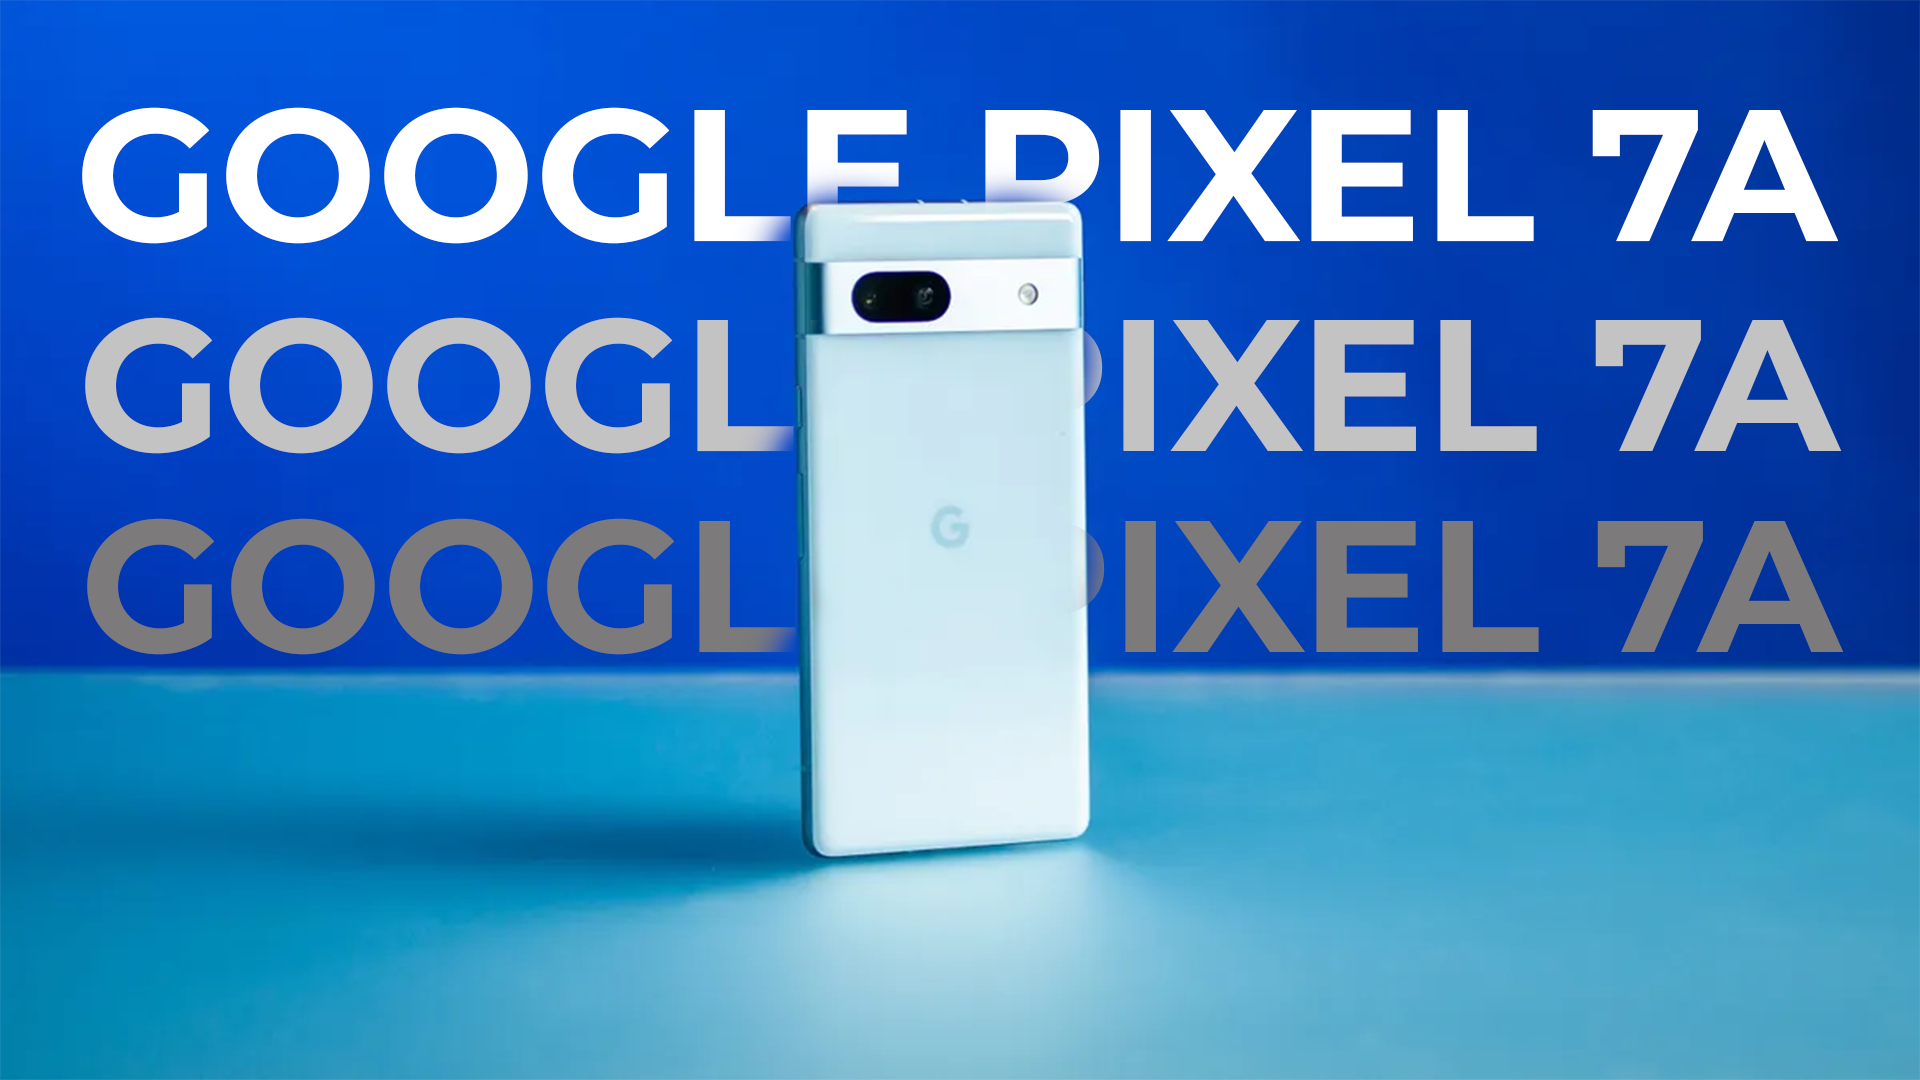 Beating The Competition: Features That Make Google Pixel 7a Shine